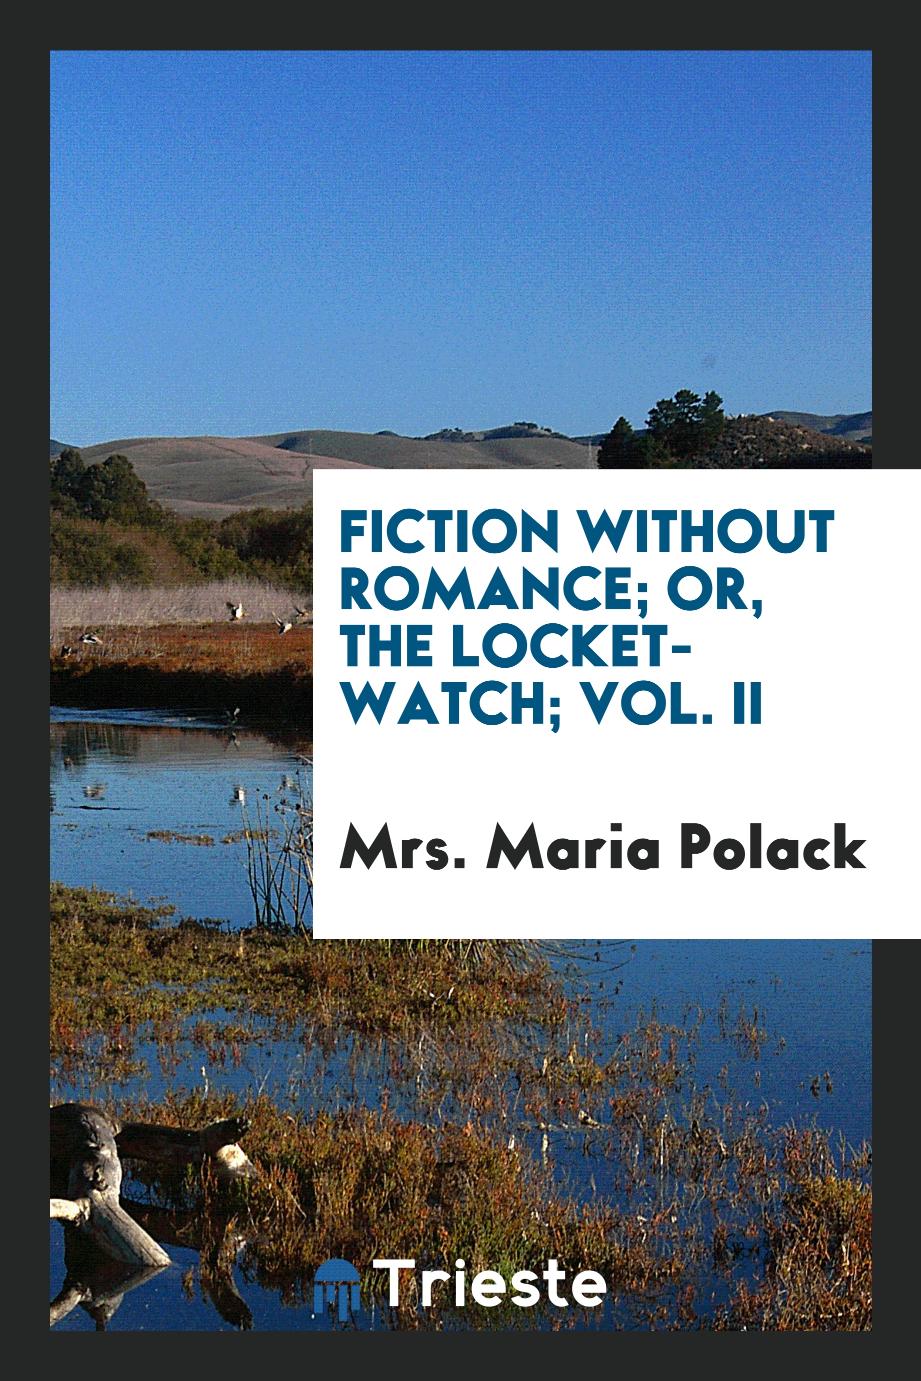 Fiction without romance; or, The locket-watch; Vol. II